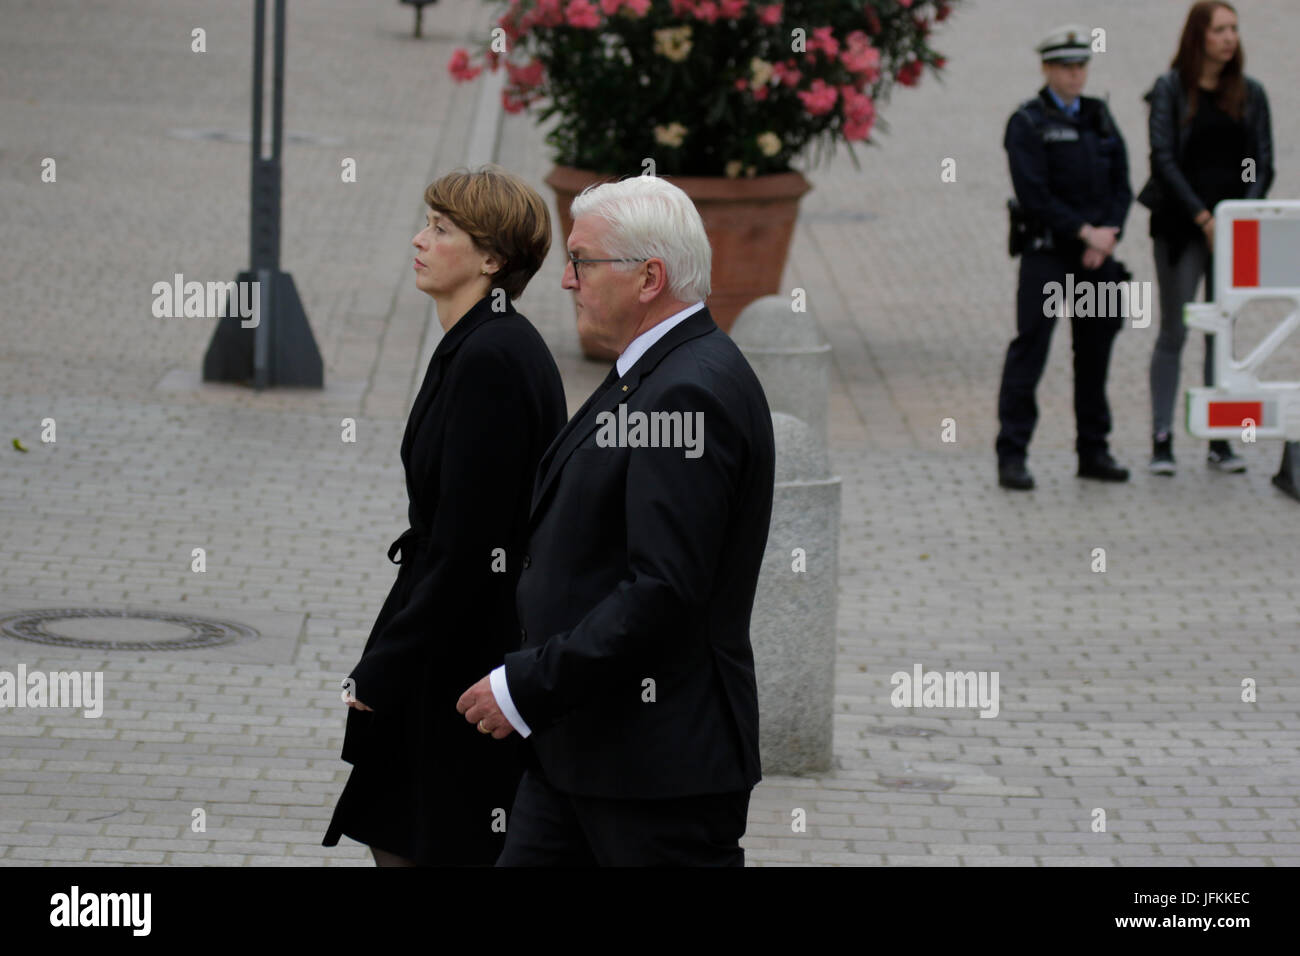 Speyer, Germany. 1st July 2017. Frank-Walter Steinmeier (right), the President of Germany, and his wife Elke Budenbender (left) arrive at the Speyer Cathedral. A funeral mass for the former German Chancellor Helmut Kohl was held in the Cathedral of Speyer. it was attended by over 100 invited guests and several thousand people followed the mass outside the Cathedral. Stock Photo